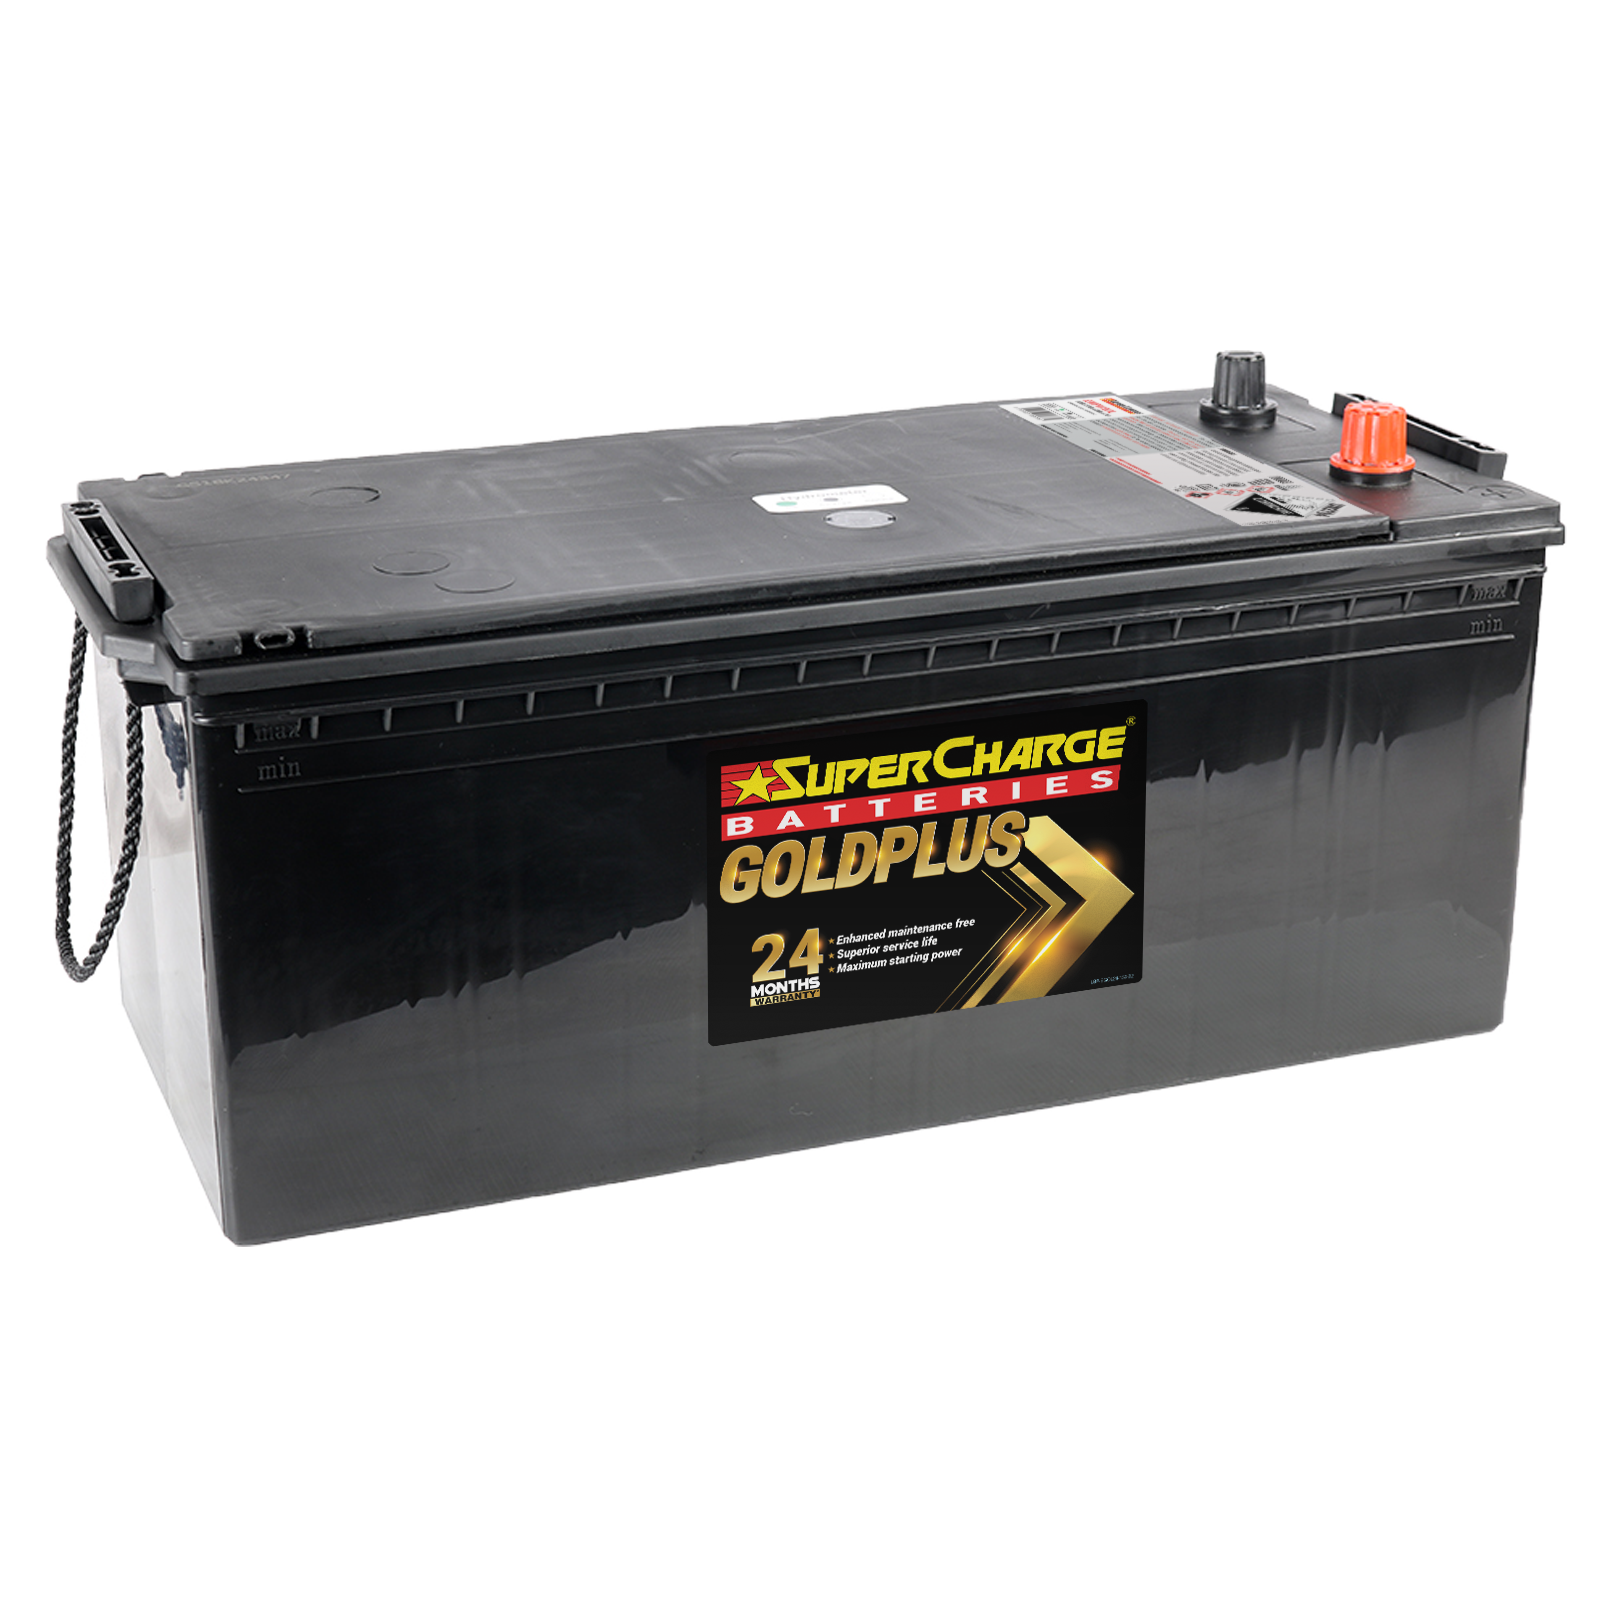 EMFN150L Battery - High Capacity and Dependability | Super Charge Batteries